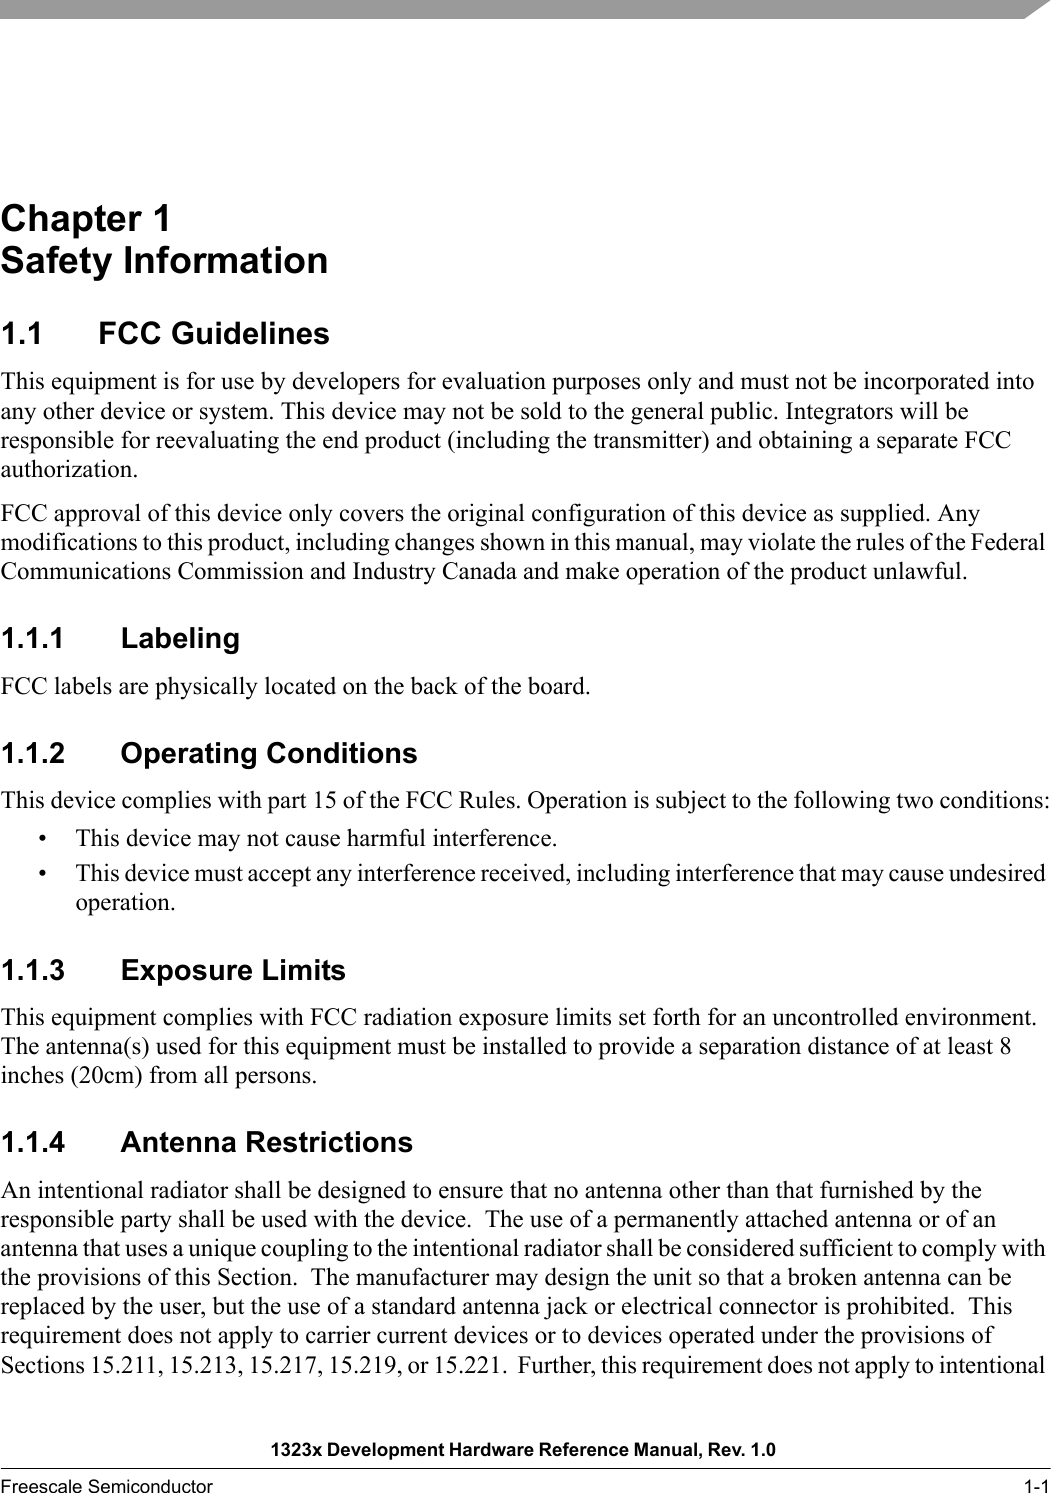 1323x Development Hardware Reference Manual, Rev. 1.0 Freescale Semiconductor 1-1Chapter 1  Safety Information1.1 FCC GuidelinesThis equipment is for use by developers for evaluation purposes only and must not be incorporated into any other device or system. This device may not be sold to the general public. Integrators will be responsible for reevaluating the end product (including the transmitter) and obtaining a separate FCC authorization.FCC approval of this device only covers the original configuration of this device as supplied. Any modifications to this product, including changes shown in this manual, may violate the rules of the Federal Communications Commission and Industry Canada and make operation of the product unlawful.1.1.1 LabelingFCC labels are physically located on the back of the board.1.1.2 Operating ConditionsThis device complies with part 15 of the FCC Rules. Operation is subject to the following two conditions:• This device may not cause harmful interference.• This device must accept any interference received, including interference that may cause undesired operation.1.1.3 Exposure LimitsThis equipment complies with FCC radiation exposure limits set forth for an uncontrolled environment. The antenna(s) used for this equipment must be installed to provide a separation distance of at least 8 inches (20cm) from all persons.1.1.4 Antenna RestrictionsAn intentional radiator shall be designed to ensure that no antenna other than that furnished by the responsible party shall be used with the device.  The use of a permanently attached antenna or of an antenna that uses a unique coupling to the intentional radiator shall be considered sufficient to comply with the provisions of this Section.  The manufacturer may design the unit so that a broken antenna can be replaced by the user, but the use of a standard antenna jack or electrical connector is prohibited.  This requirement does not apply to carrier current devices or to devices operated under the provisions of Sections 15.211, 15.213, 15.217, 15.219, or 15.221.  Further, this requirement does not apply to intentional 